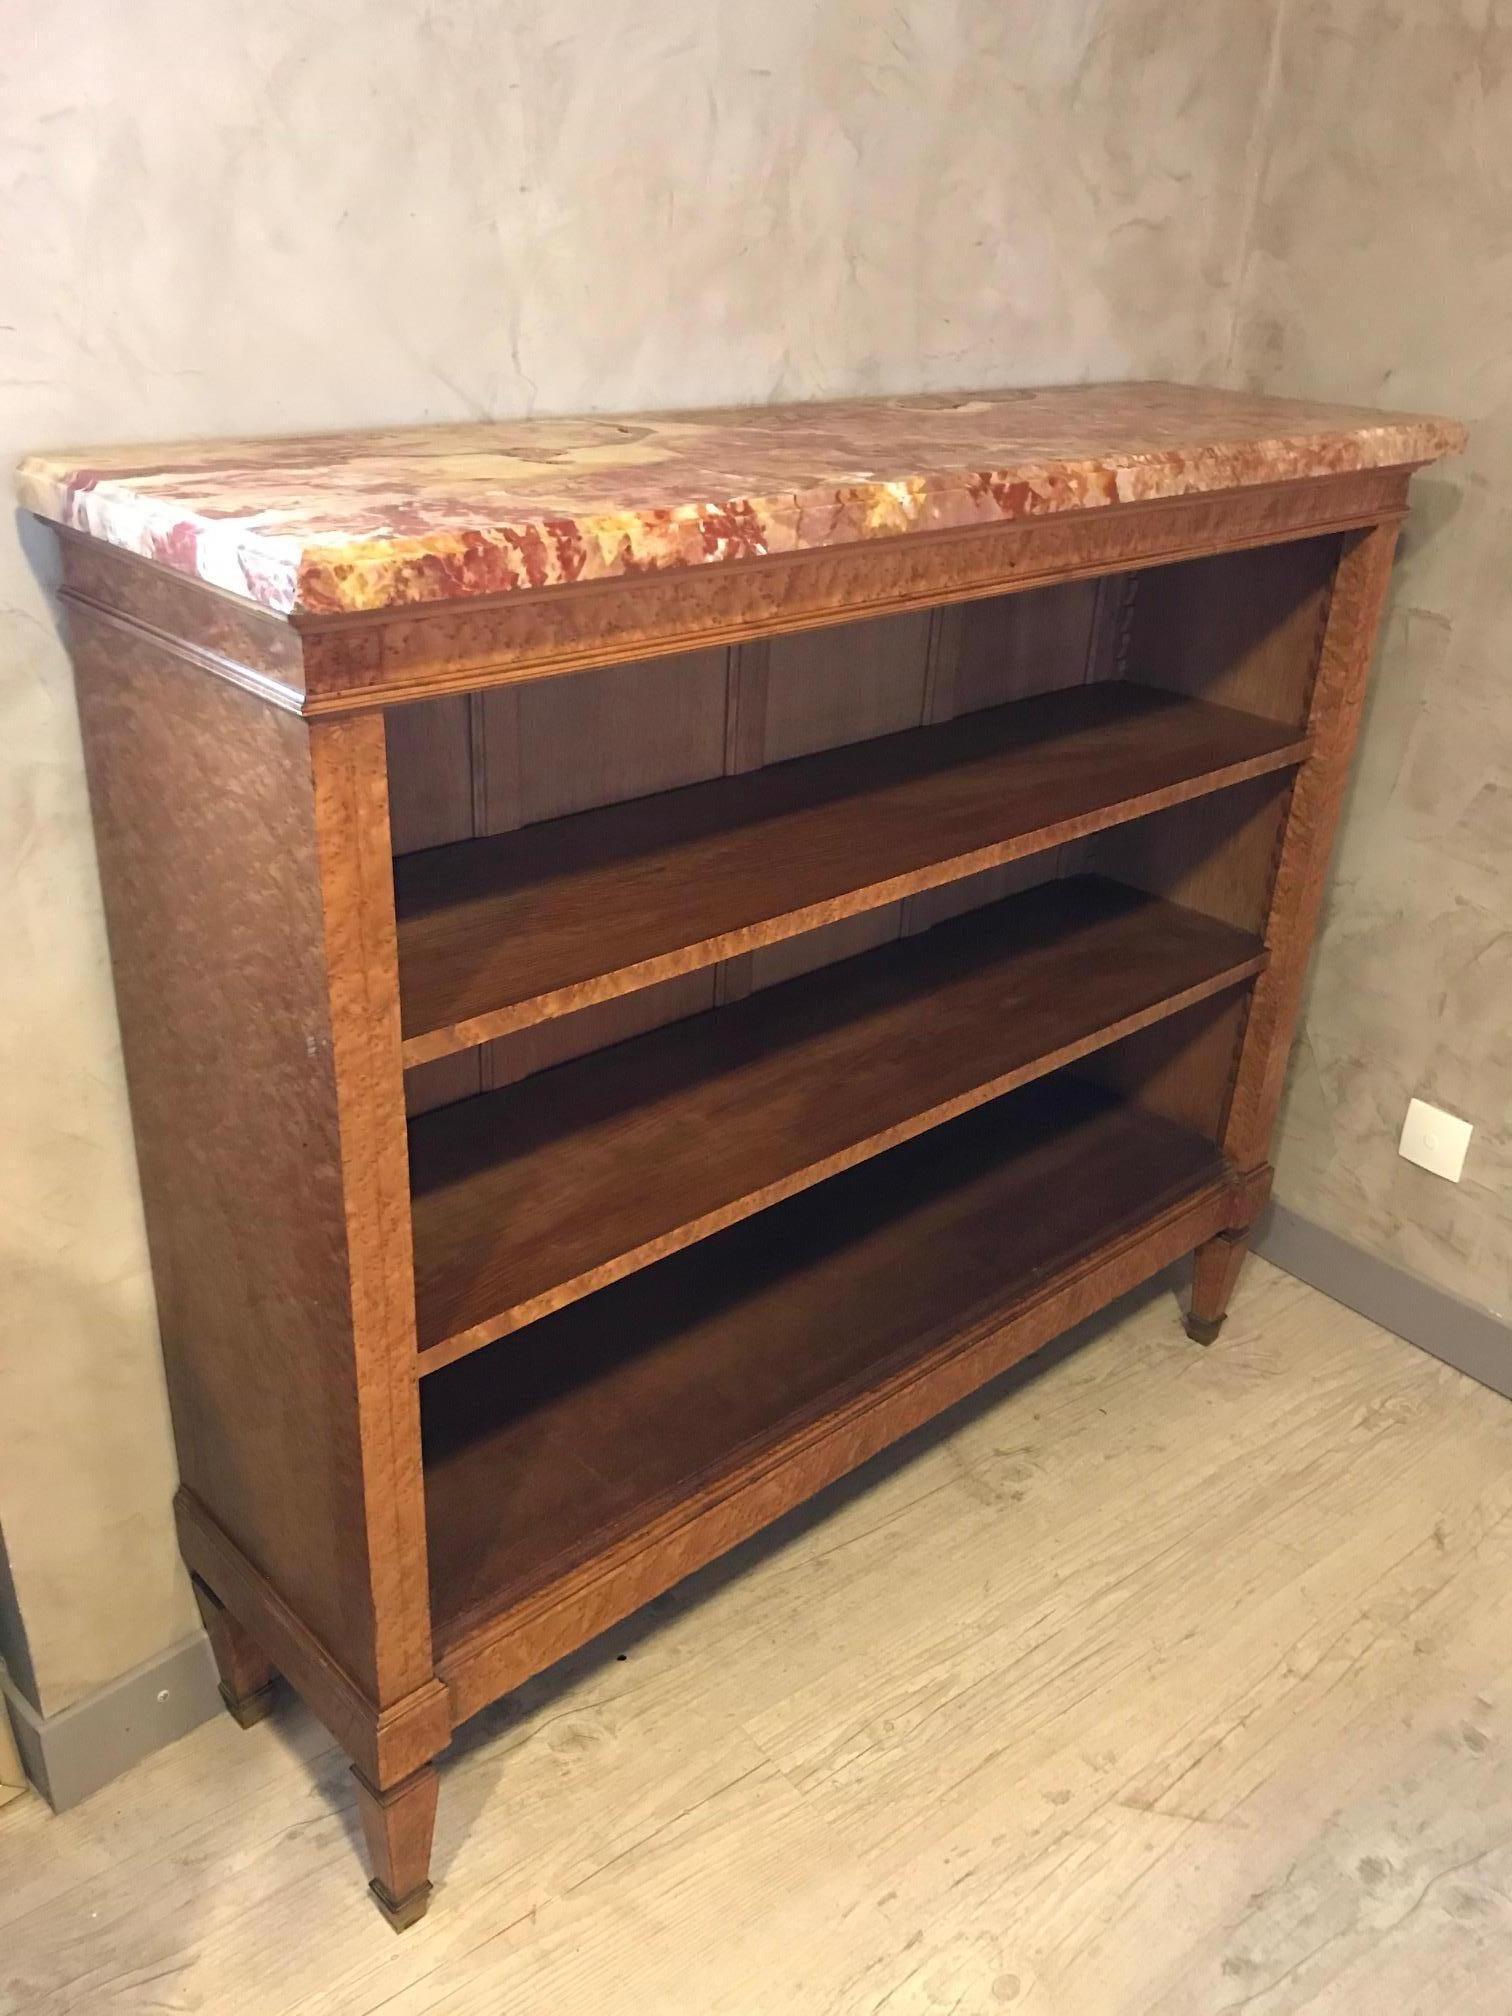 Very nice and rare French sycamore veneer and marble top bibliotheque from the 1920s.
Two large shelves.
Gilded brass mouthpiece base. Marble top removable. Very elegant and delicacy marquetry on the front.
Ideal in an office.
Nice quality.